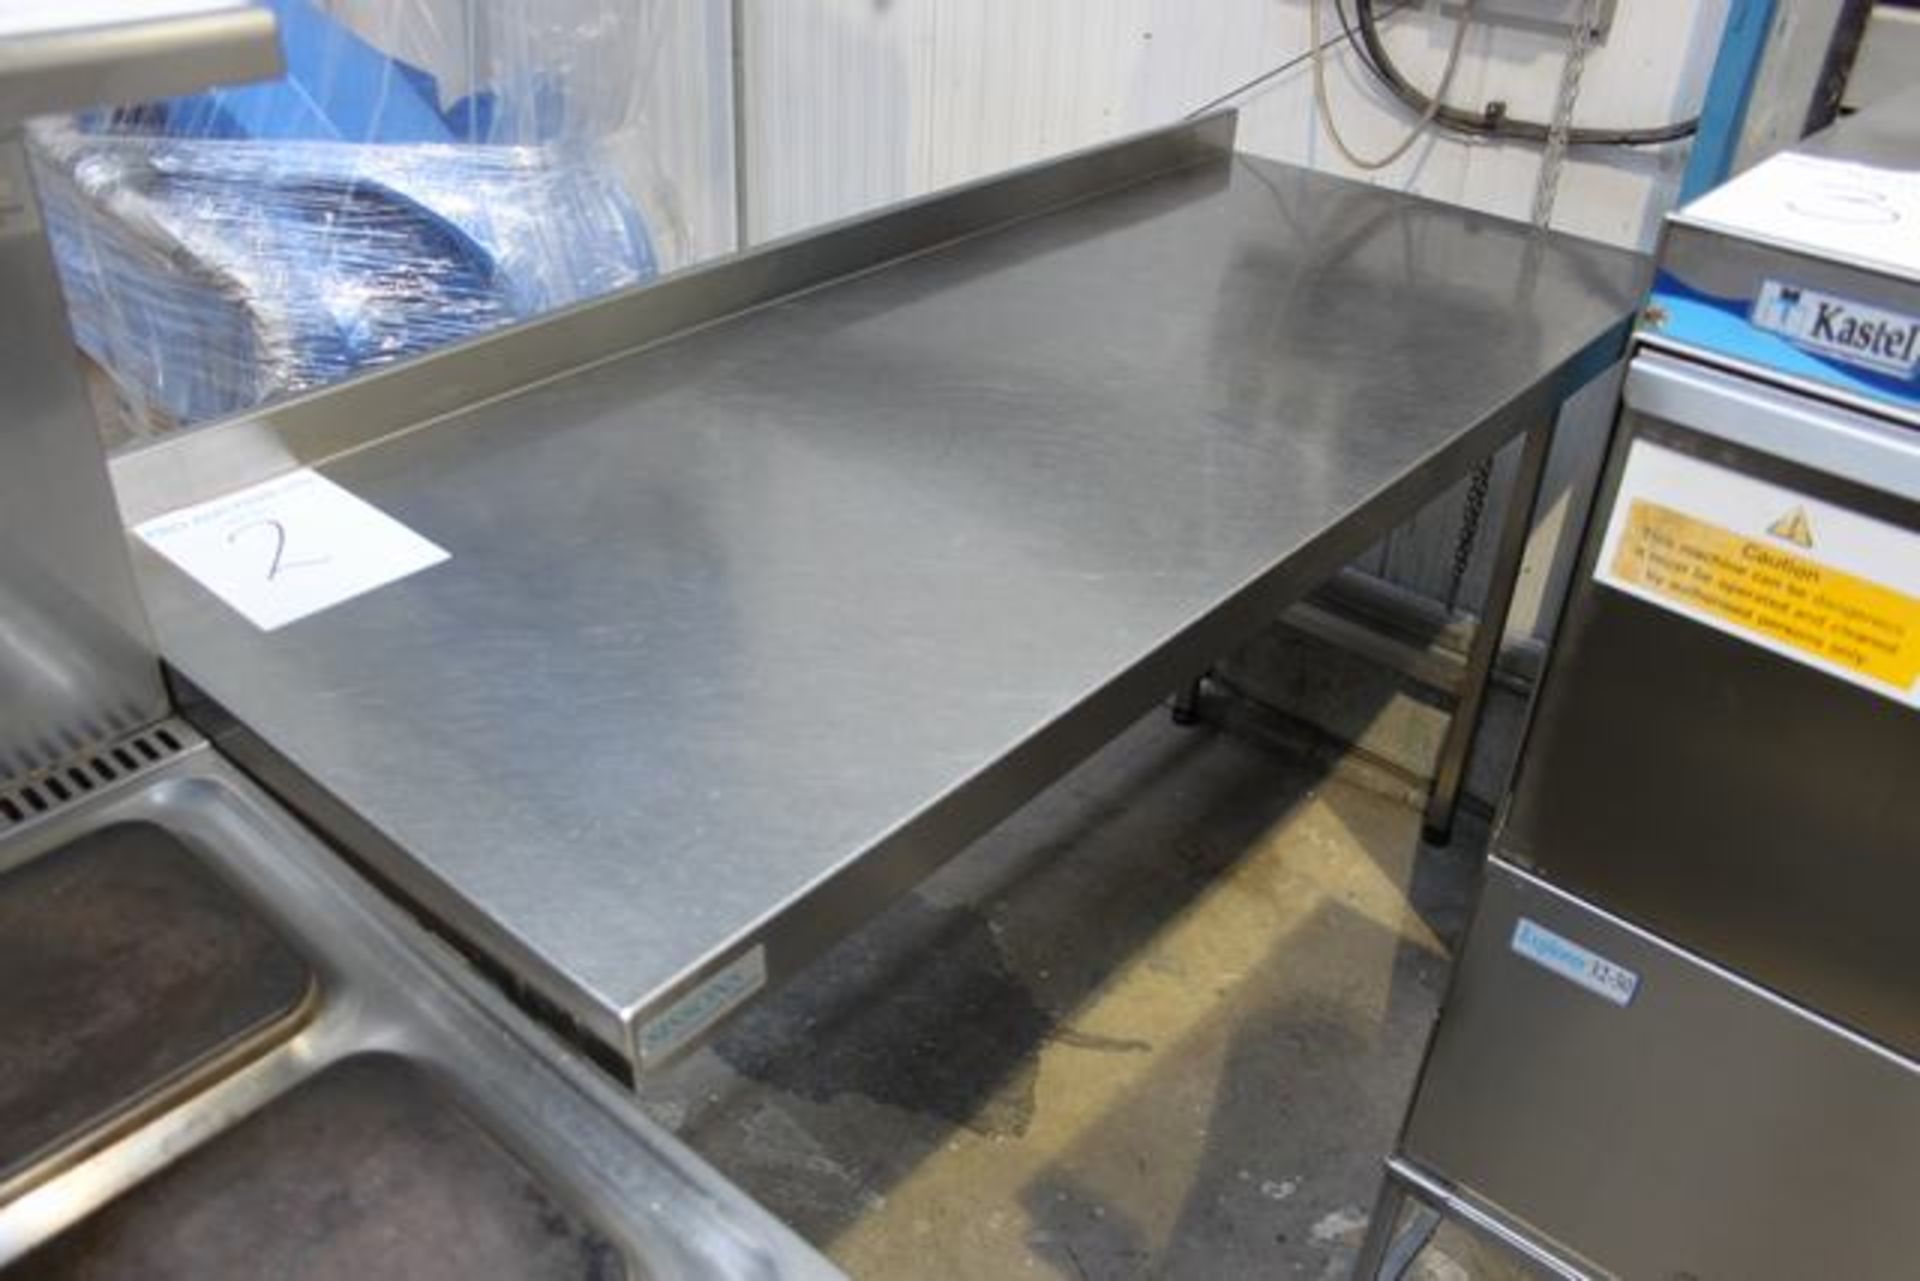 Sisson stainless steel preparation table 1700mm x 700mm